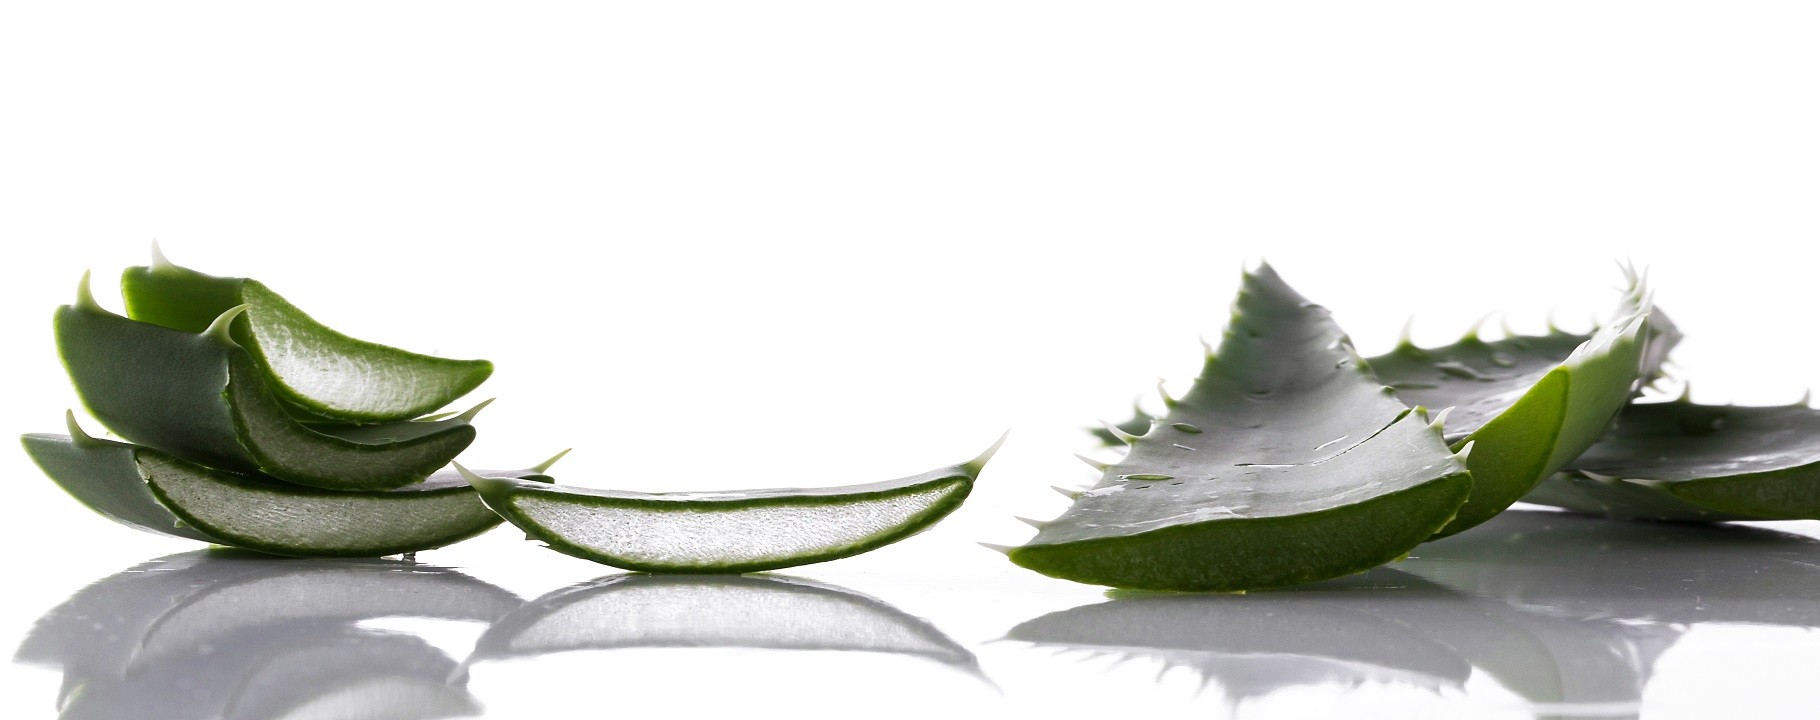 benefits of aloe vera for skin and hair